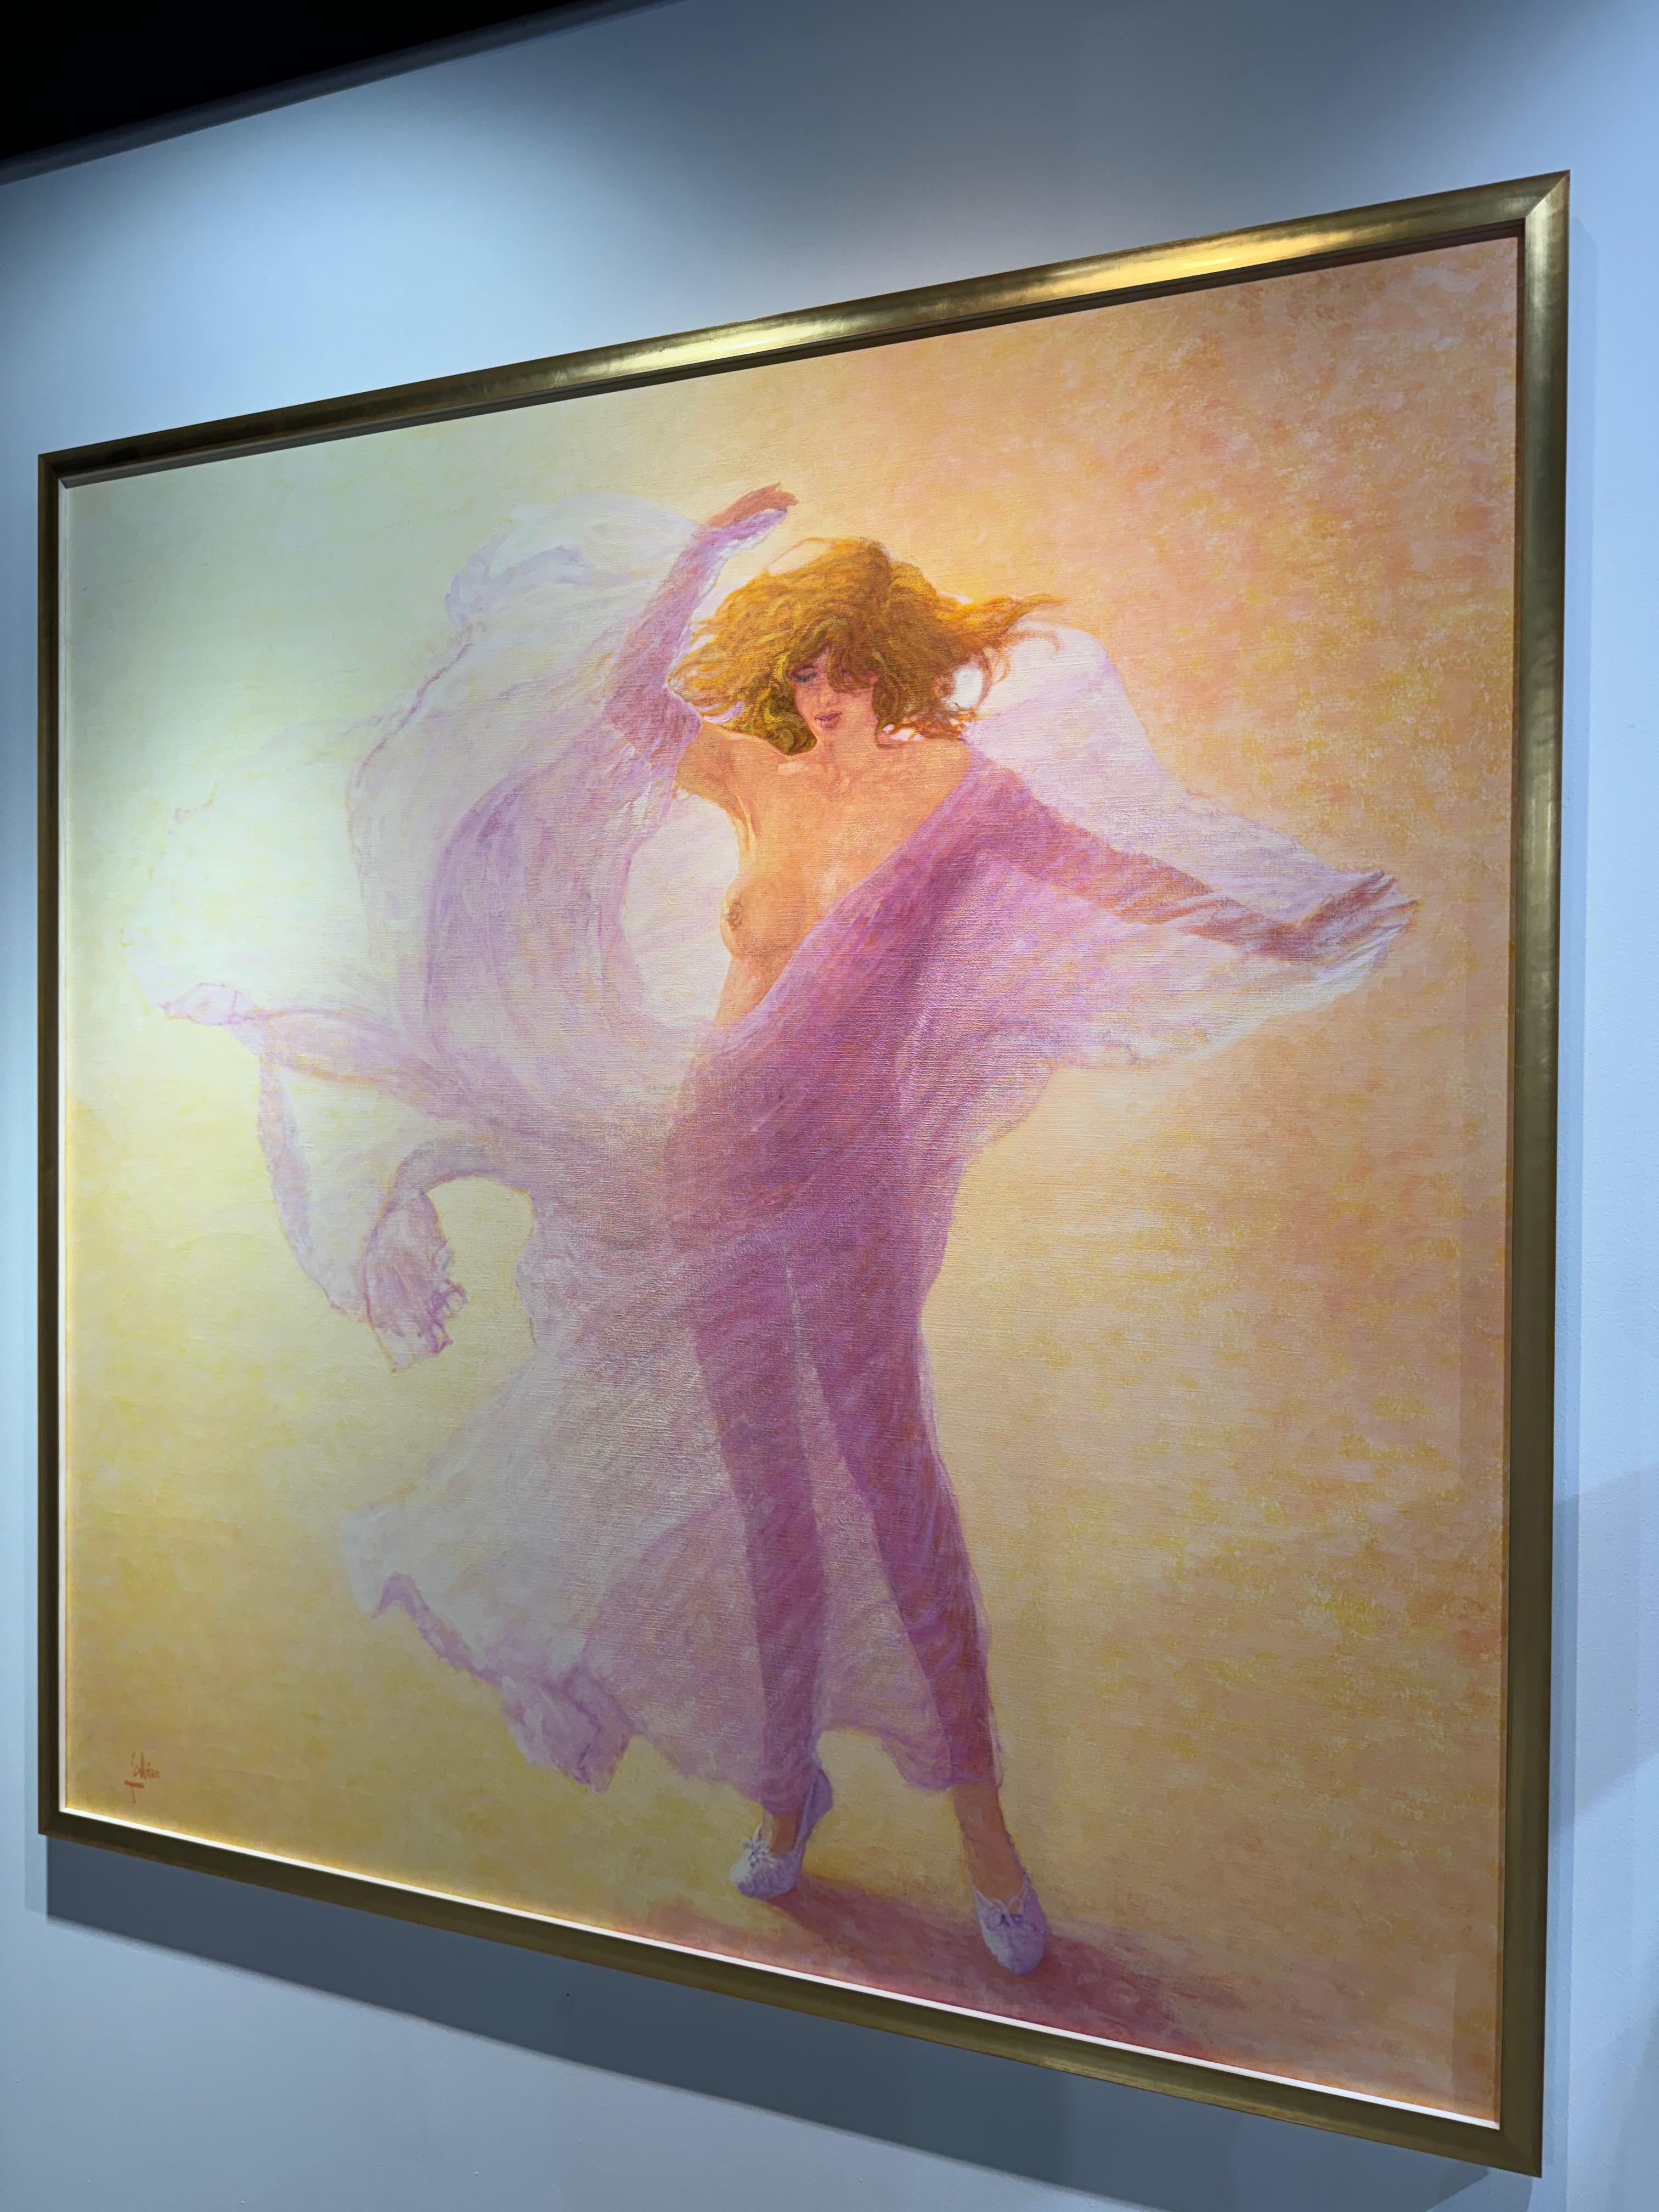 Hommage a Loie Fuller (Tribute to Loie Fuller) Large Nude Woman in Pink 
Size: 59x59 framed 71x71x2
Impressive large painting tribute to Loie Fuller she was an American actress and dancer who was a pioneer of both modern dance and theatrical